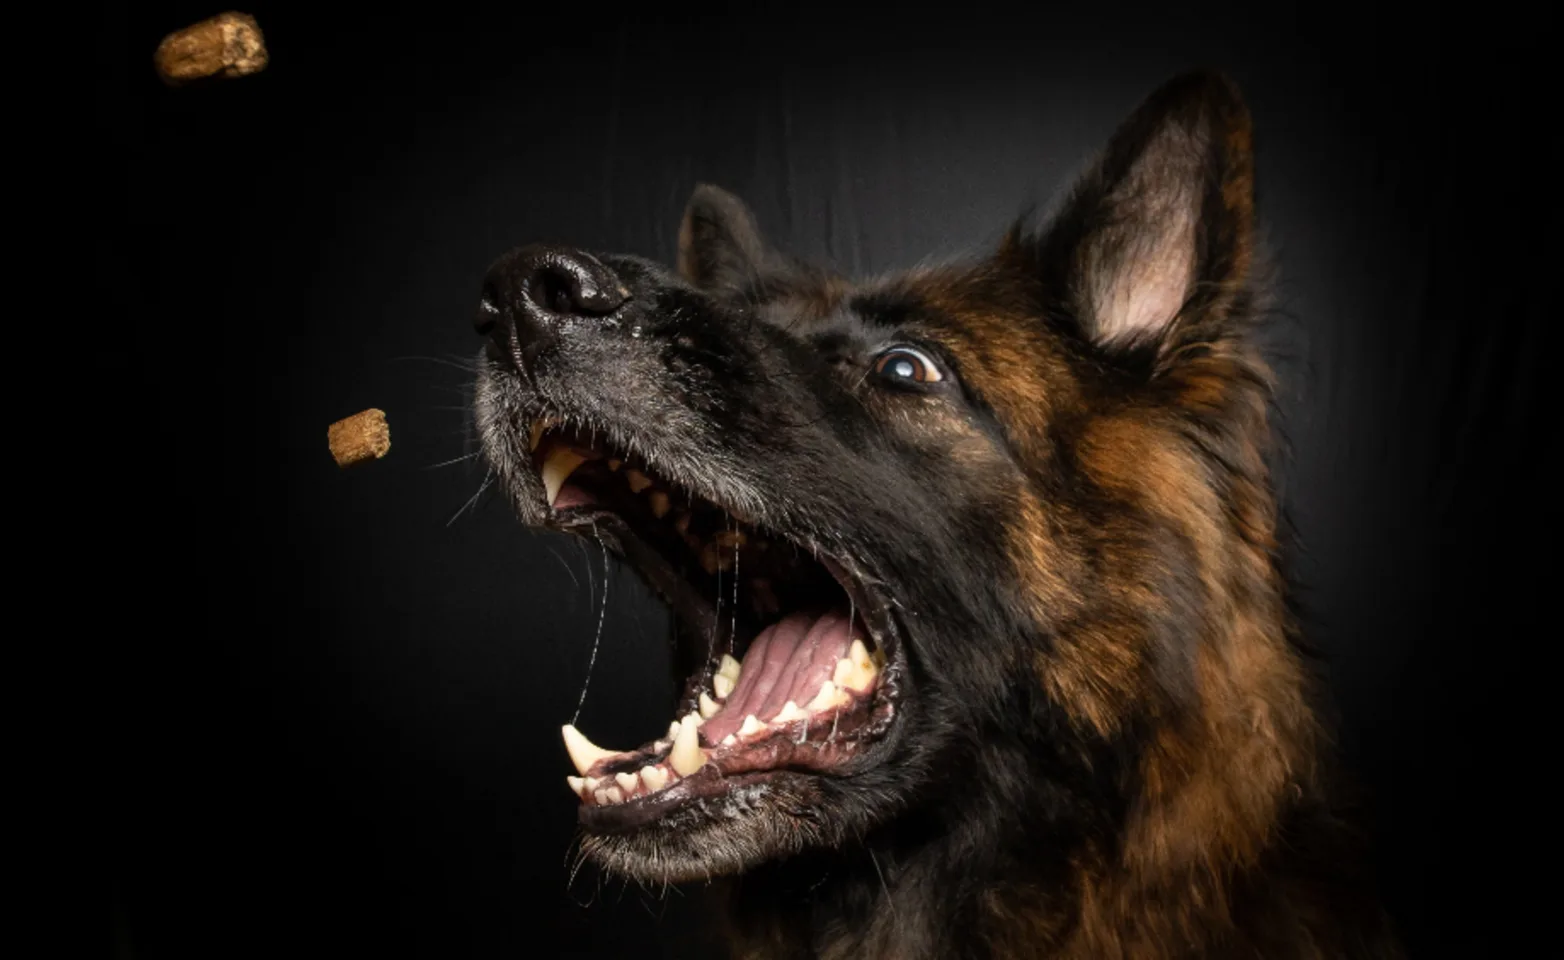 A German Shepherd catching treats in its mouth